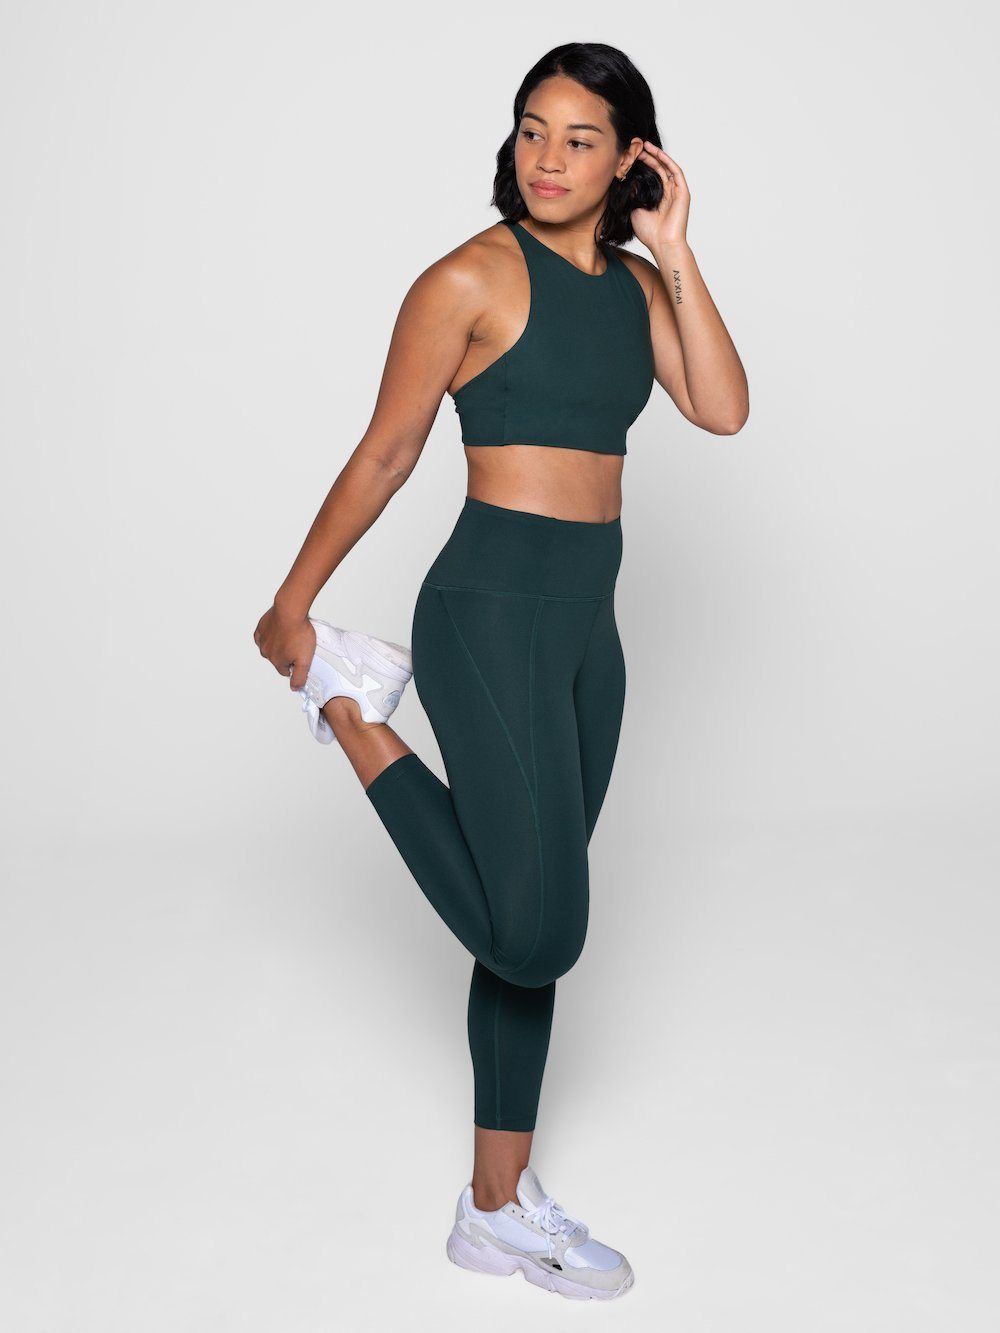 Girlfriend Collective Topanga sports Bra - Made from recycled plastic bottles Moss Underwear